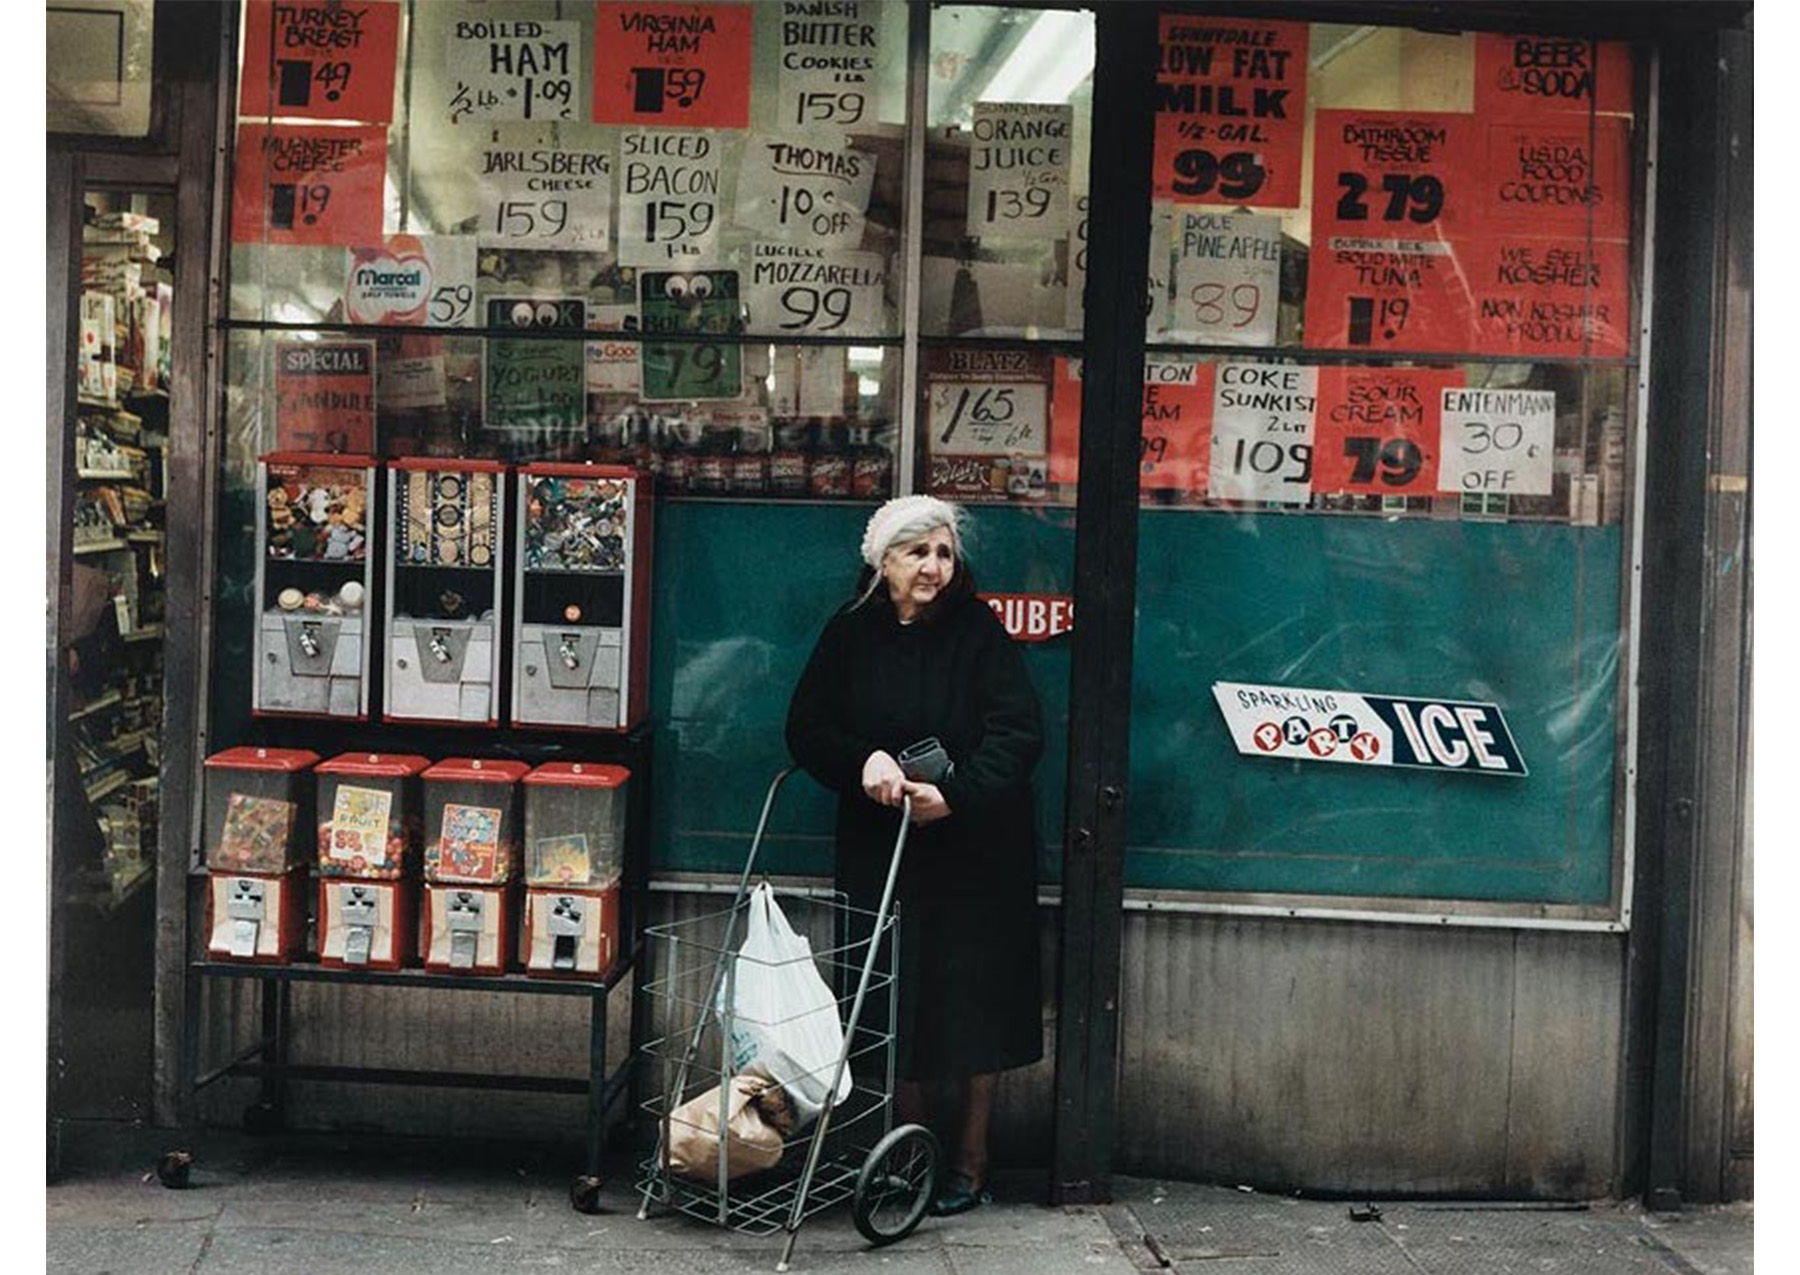 older woman in dark coat, white hat and pull cart standing in front of a grocery store window plastered with signs with group of gum ball machines to her proper left